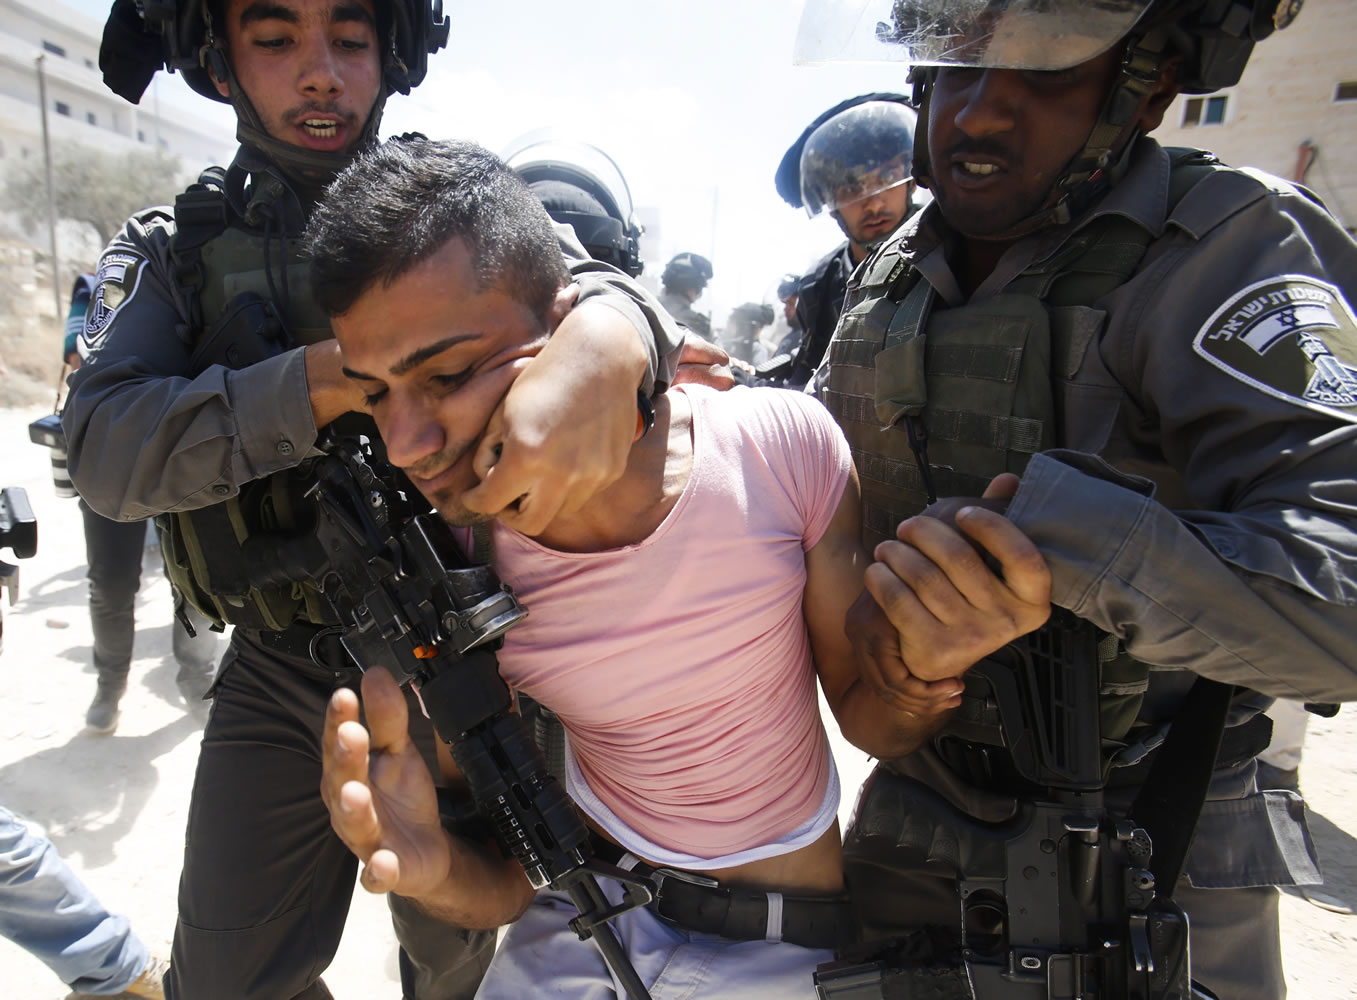 Israeli border police detain a Palestinian during a protest Sunday against the Israeli separation barrier, in Beit Jala, West Bank.